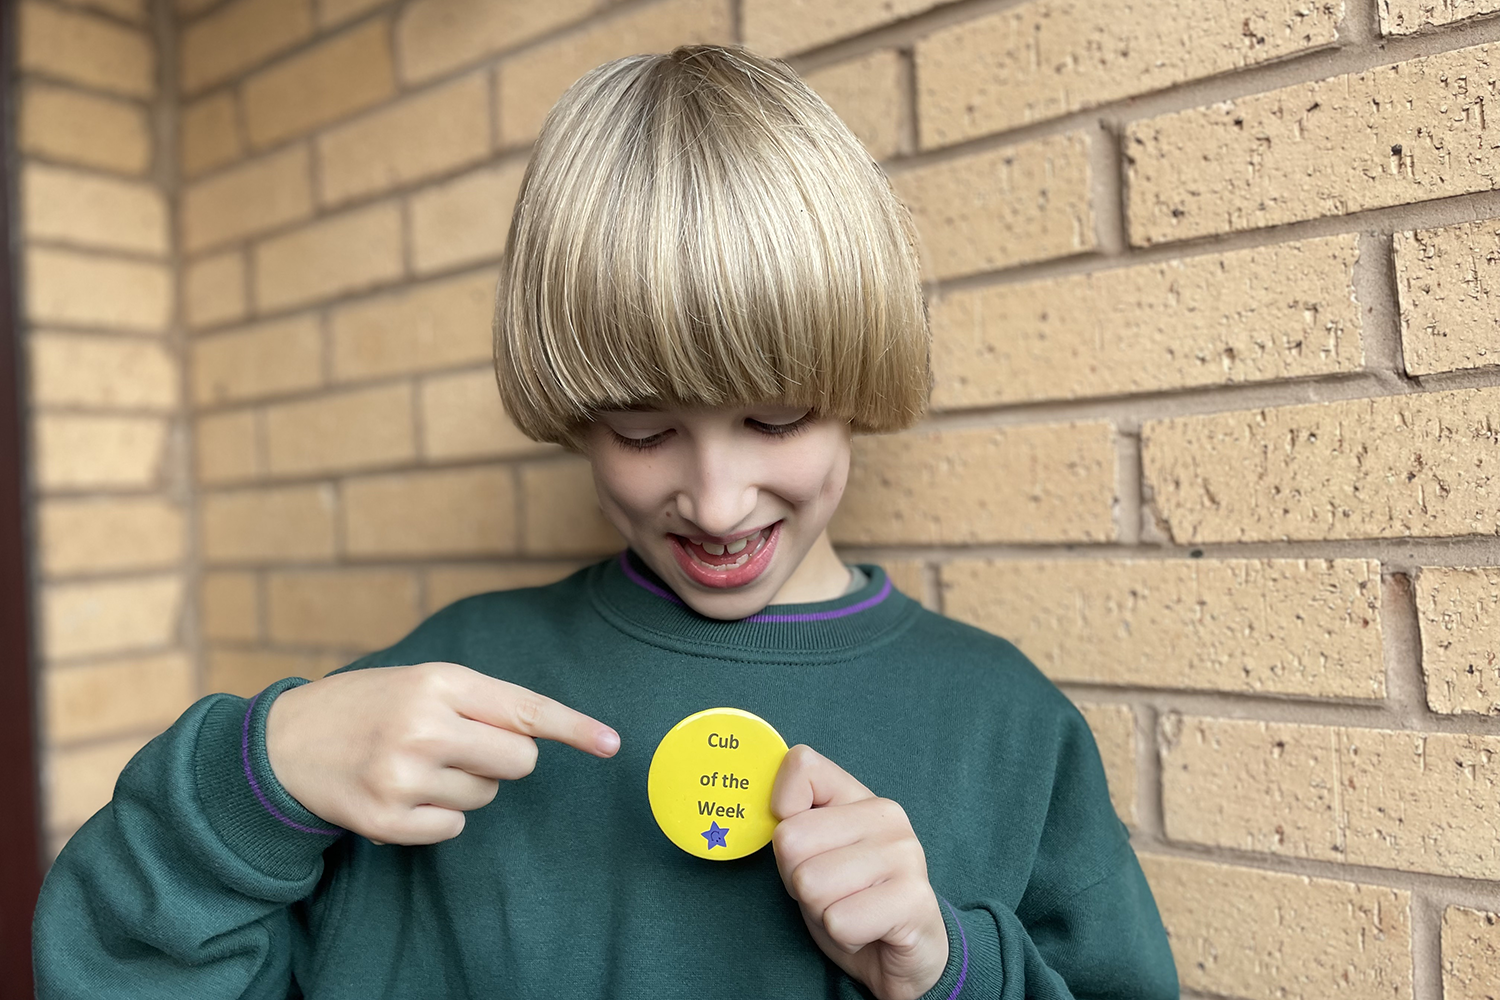 Toby in a green Cub jumper holding a yellow 'Cub of the Week badge